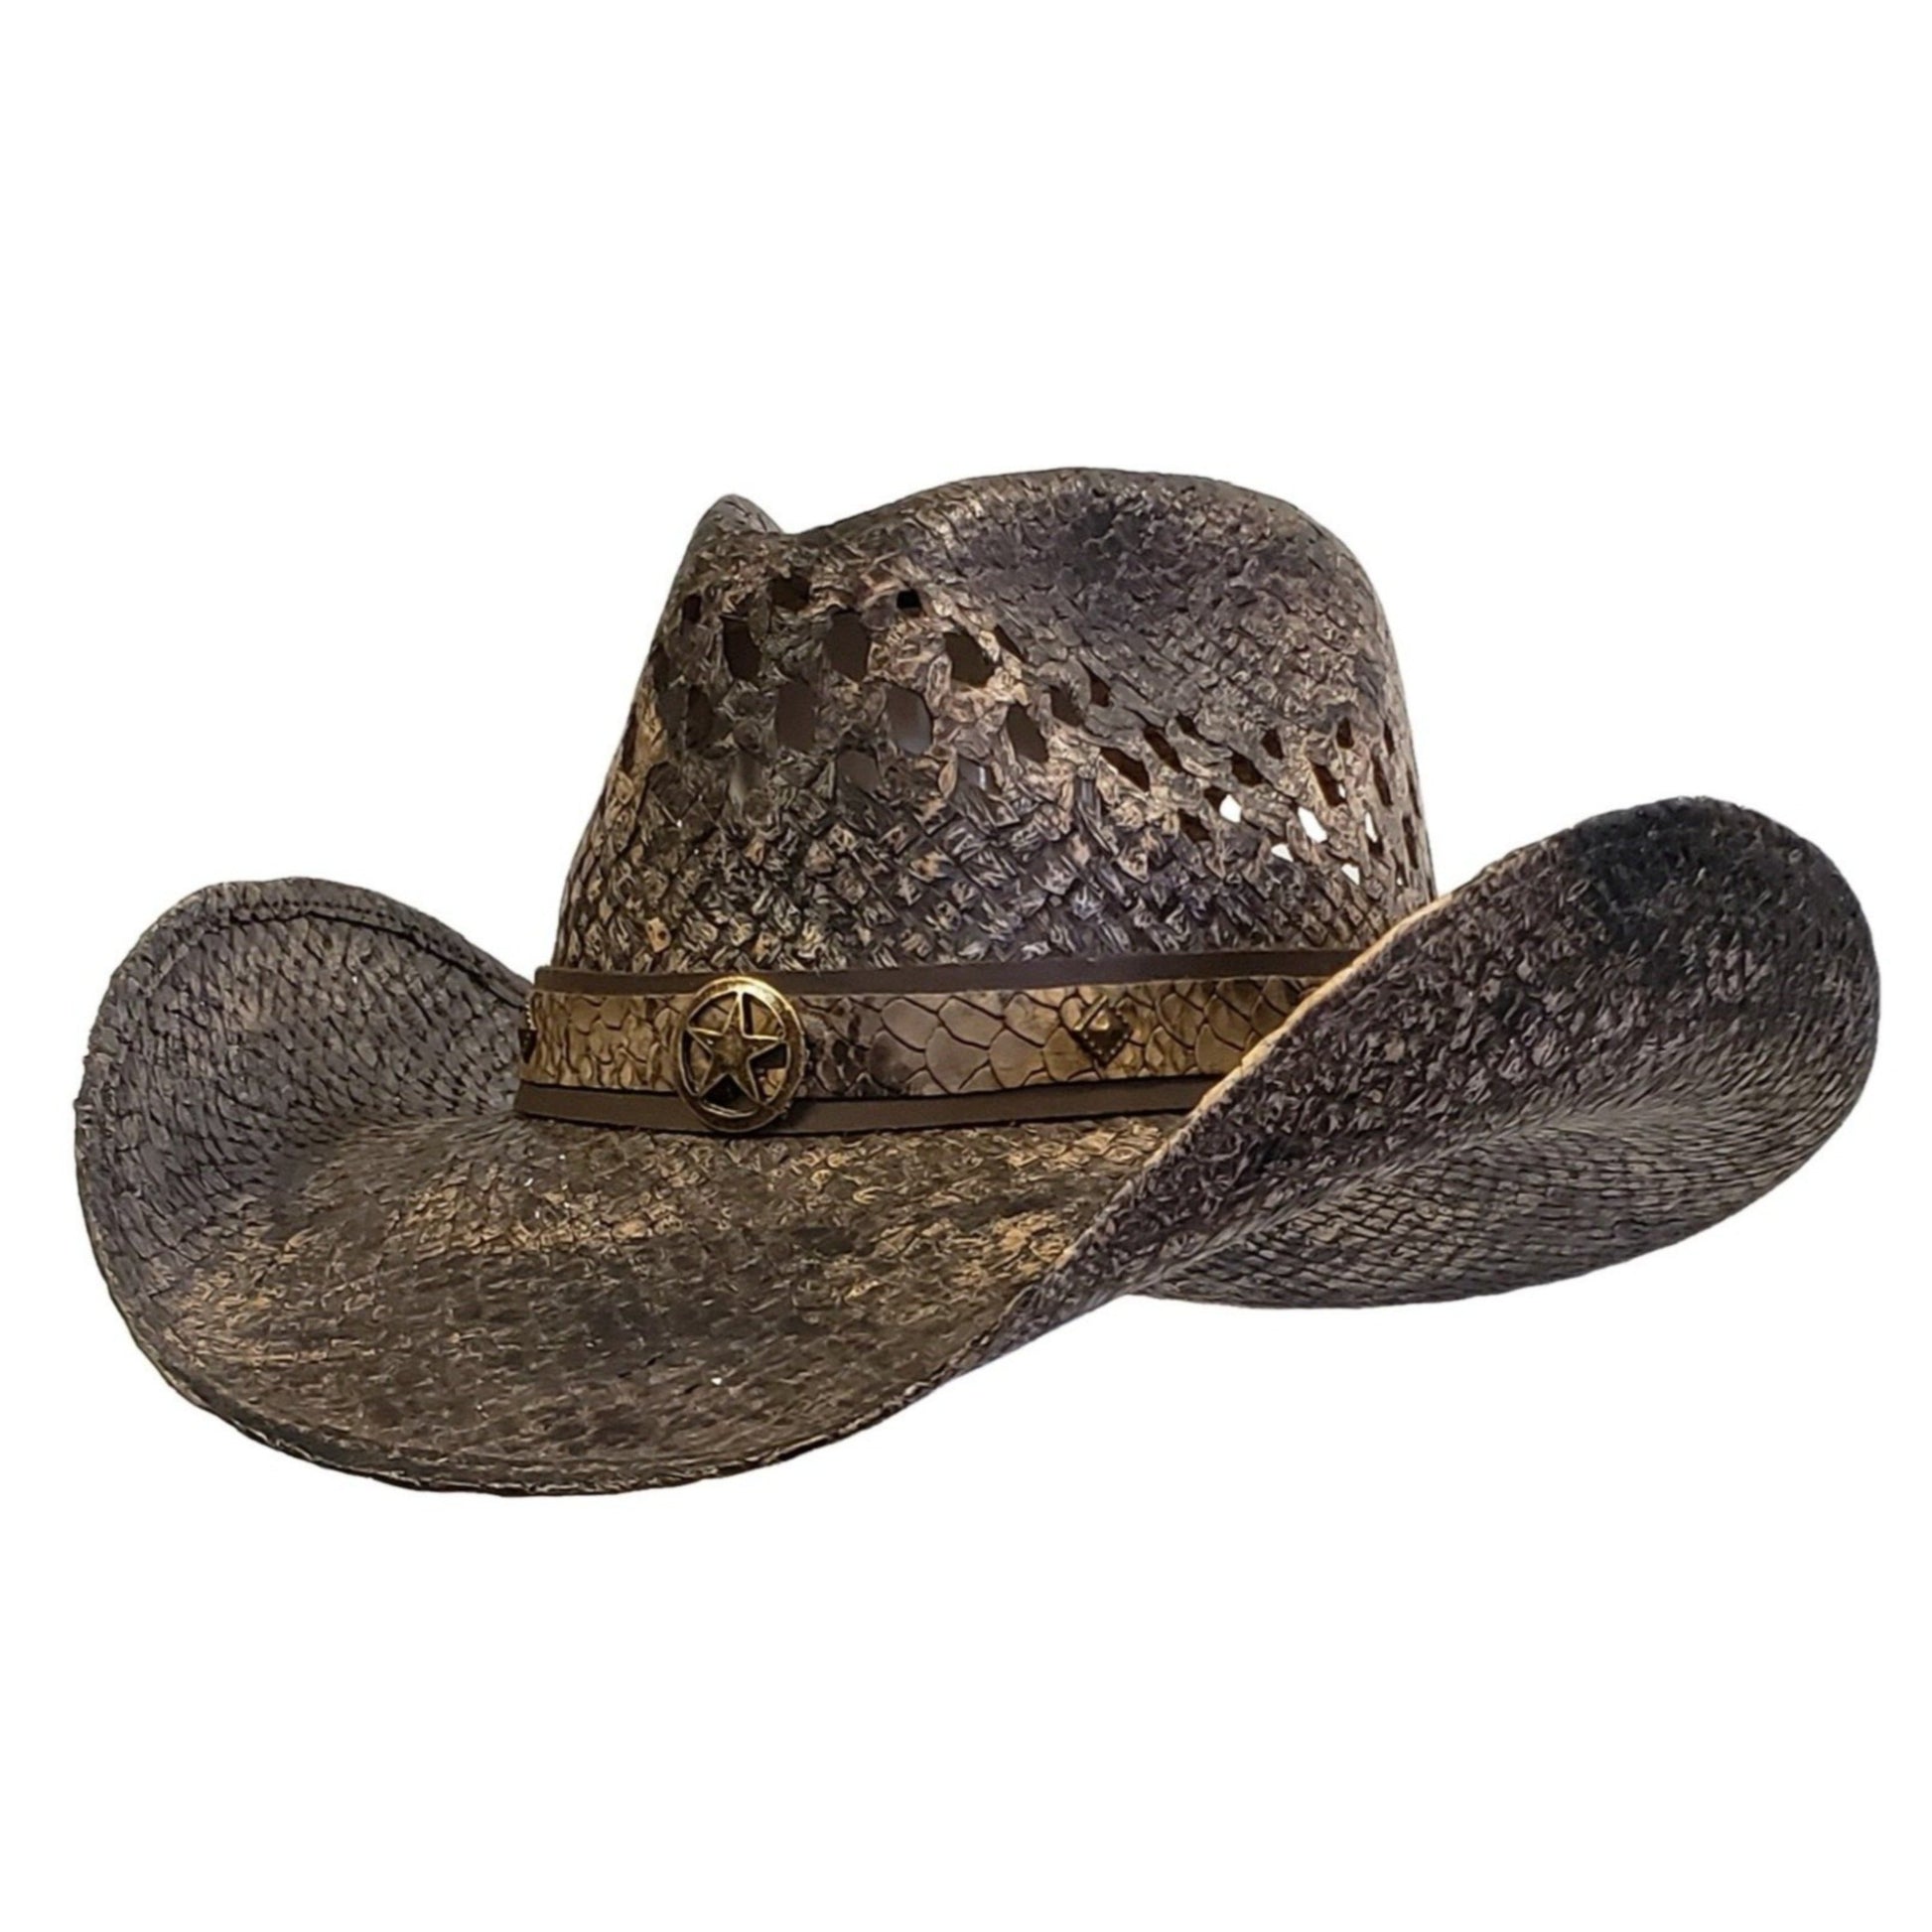 Brown straw hat with a star on a snake patterned band